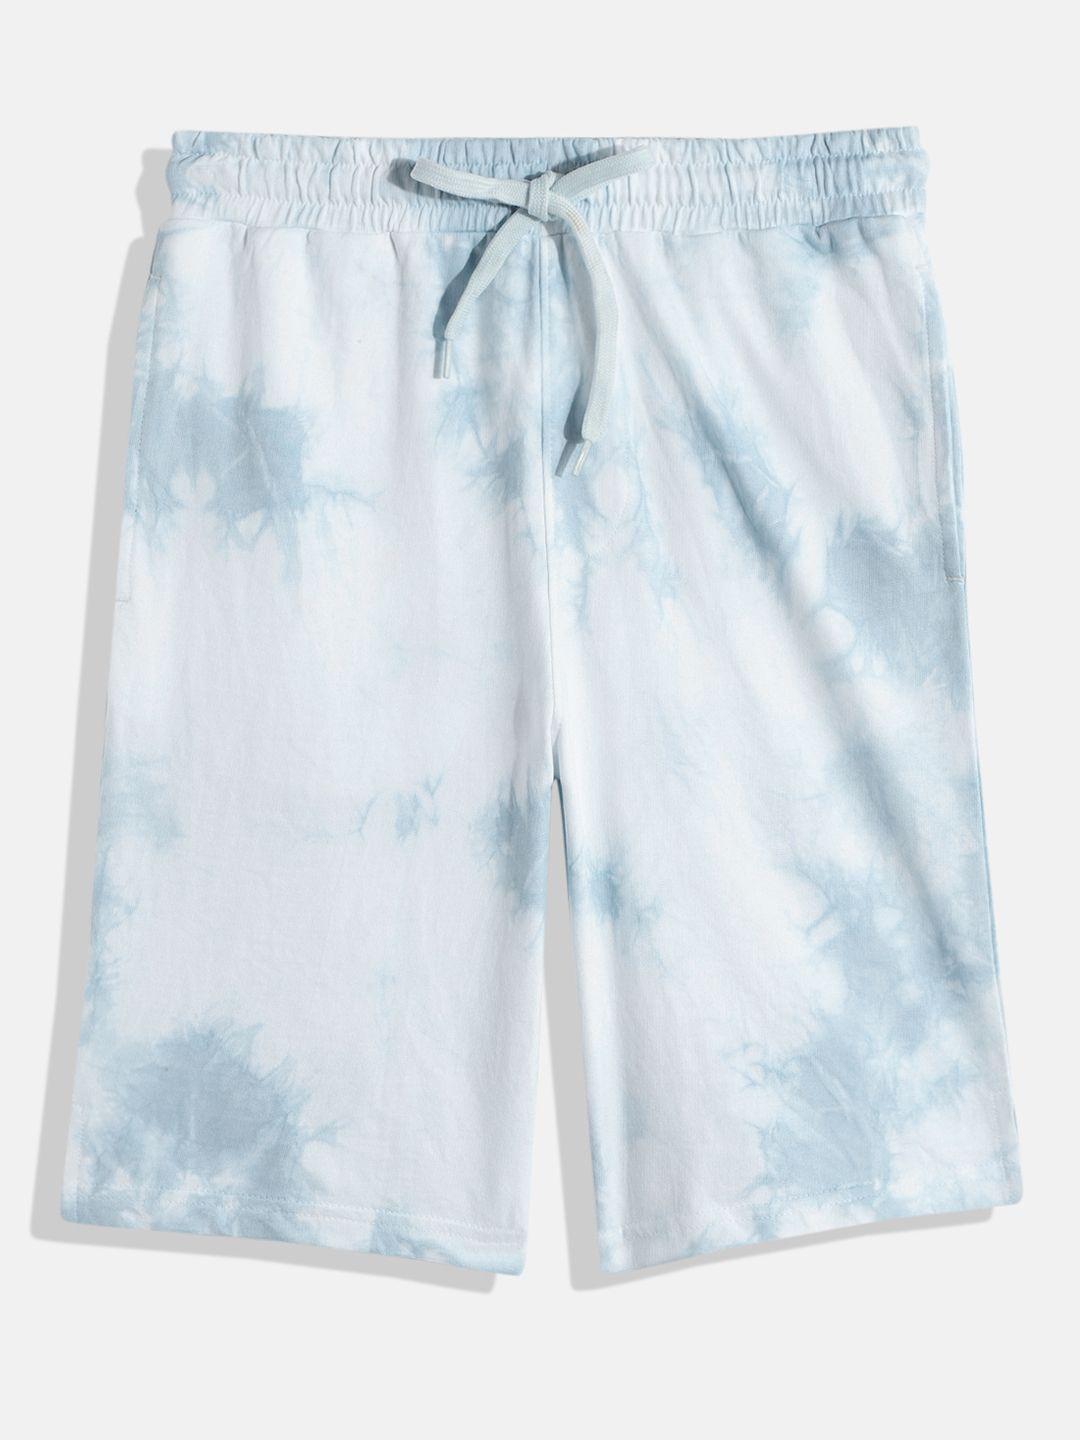 m&h juniors boys blue and white abstract printed pure cotton shorts